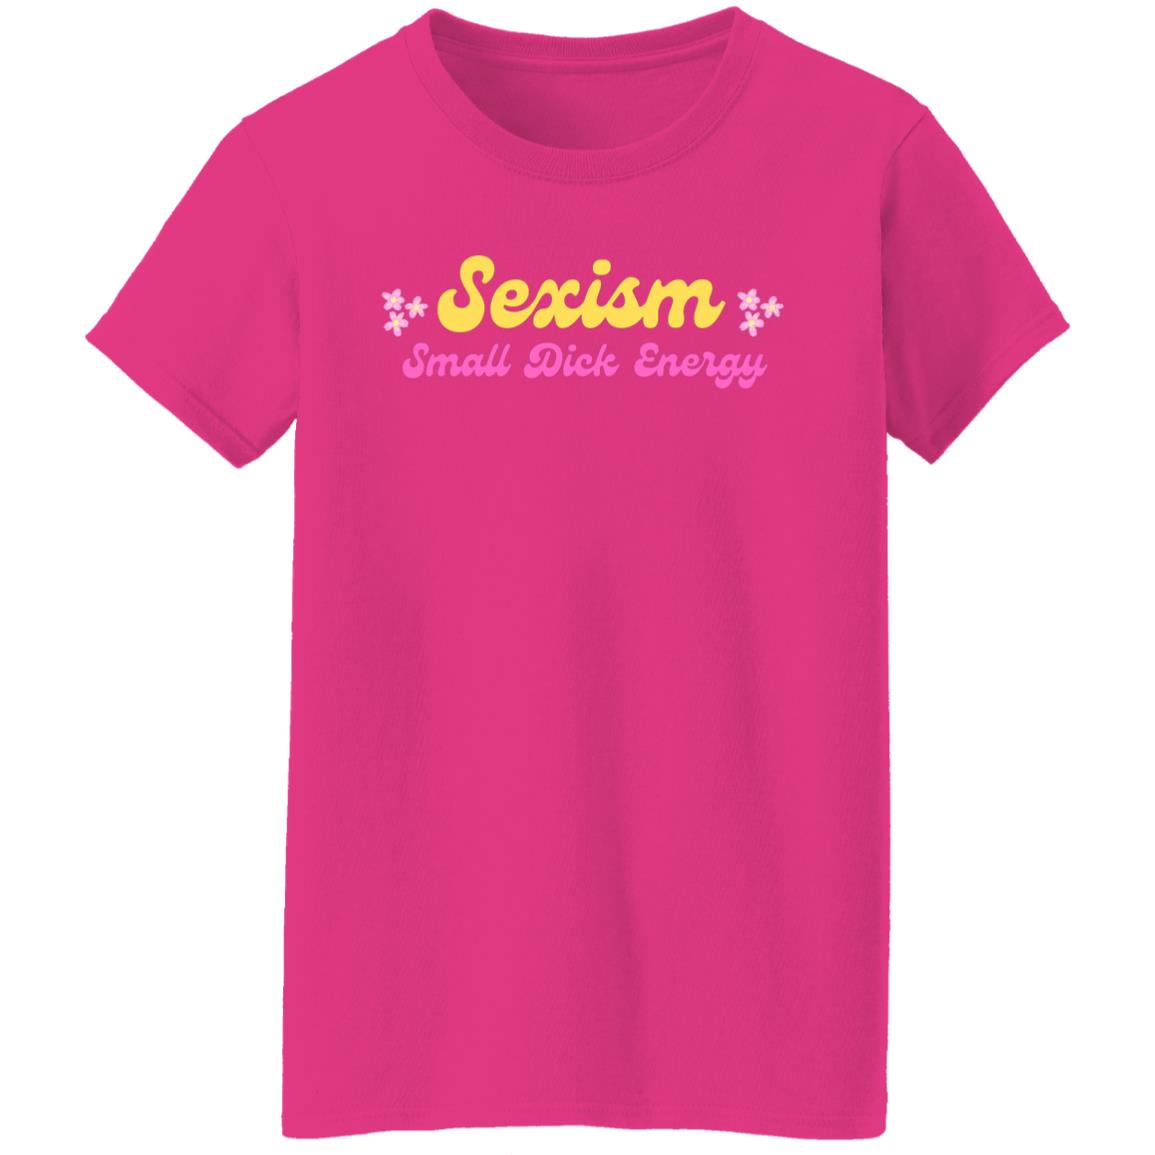 Sexism Small Dick Energy T-Shirt